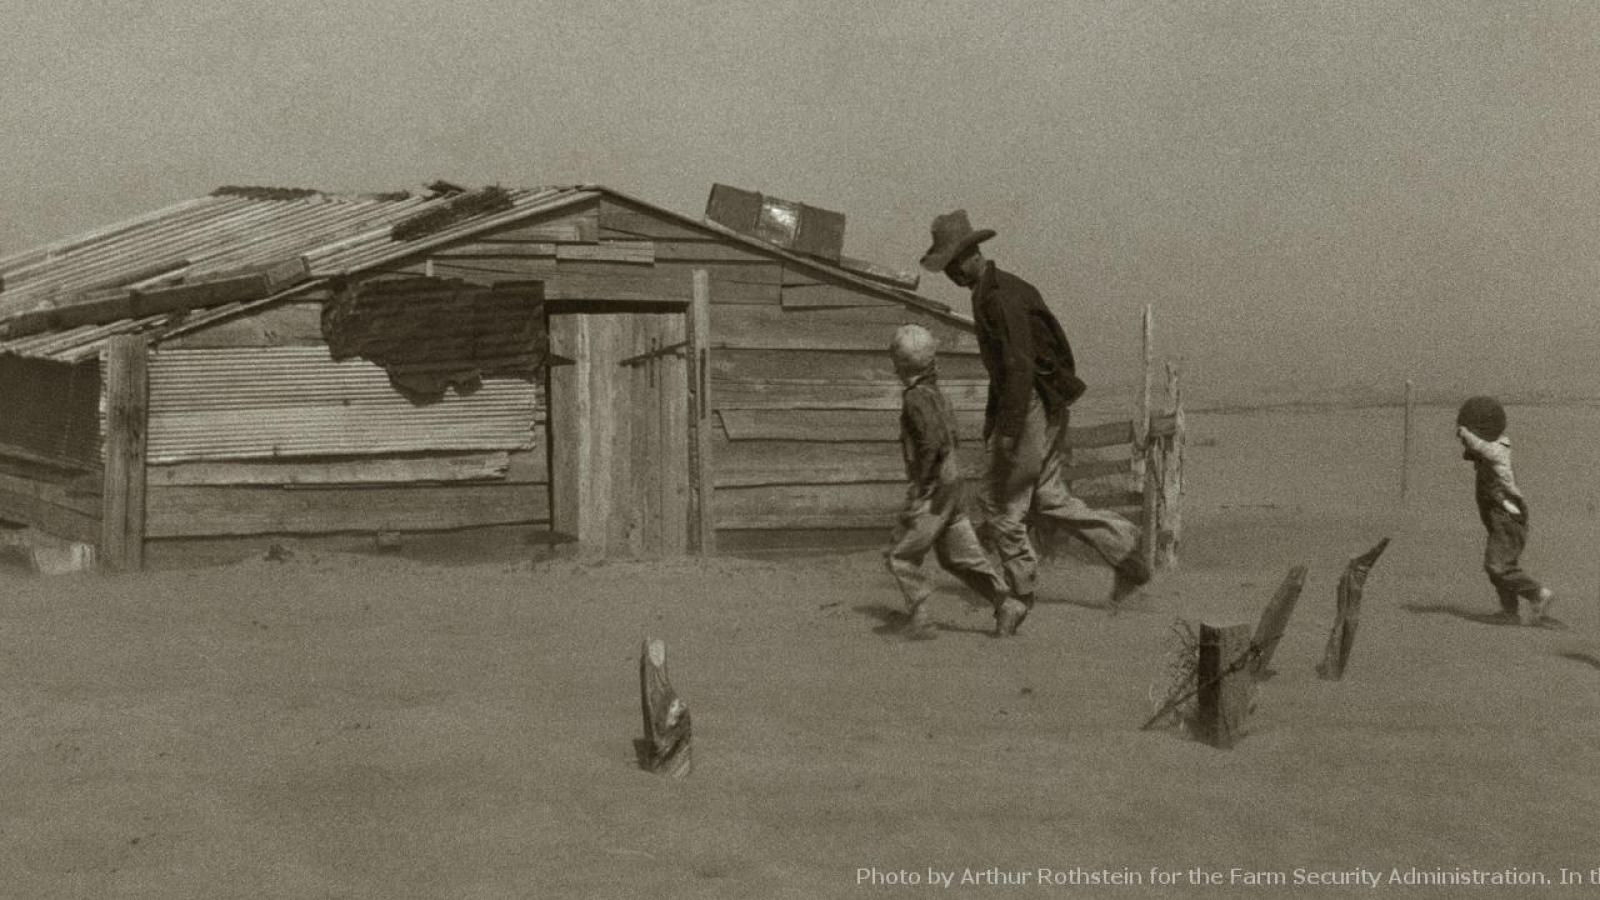 Oklahoma dust bowl in the 1930s